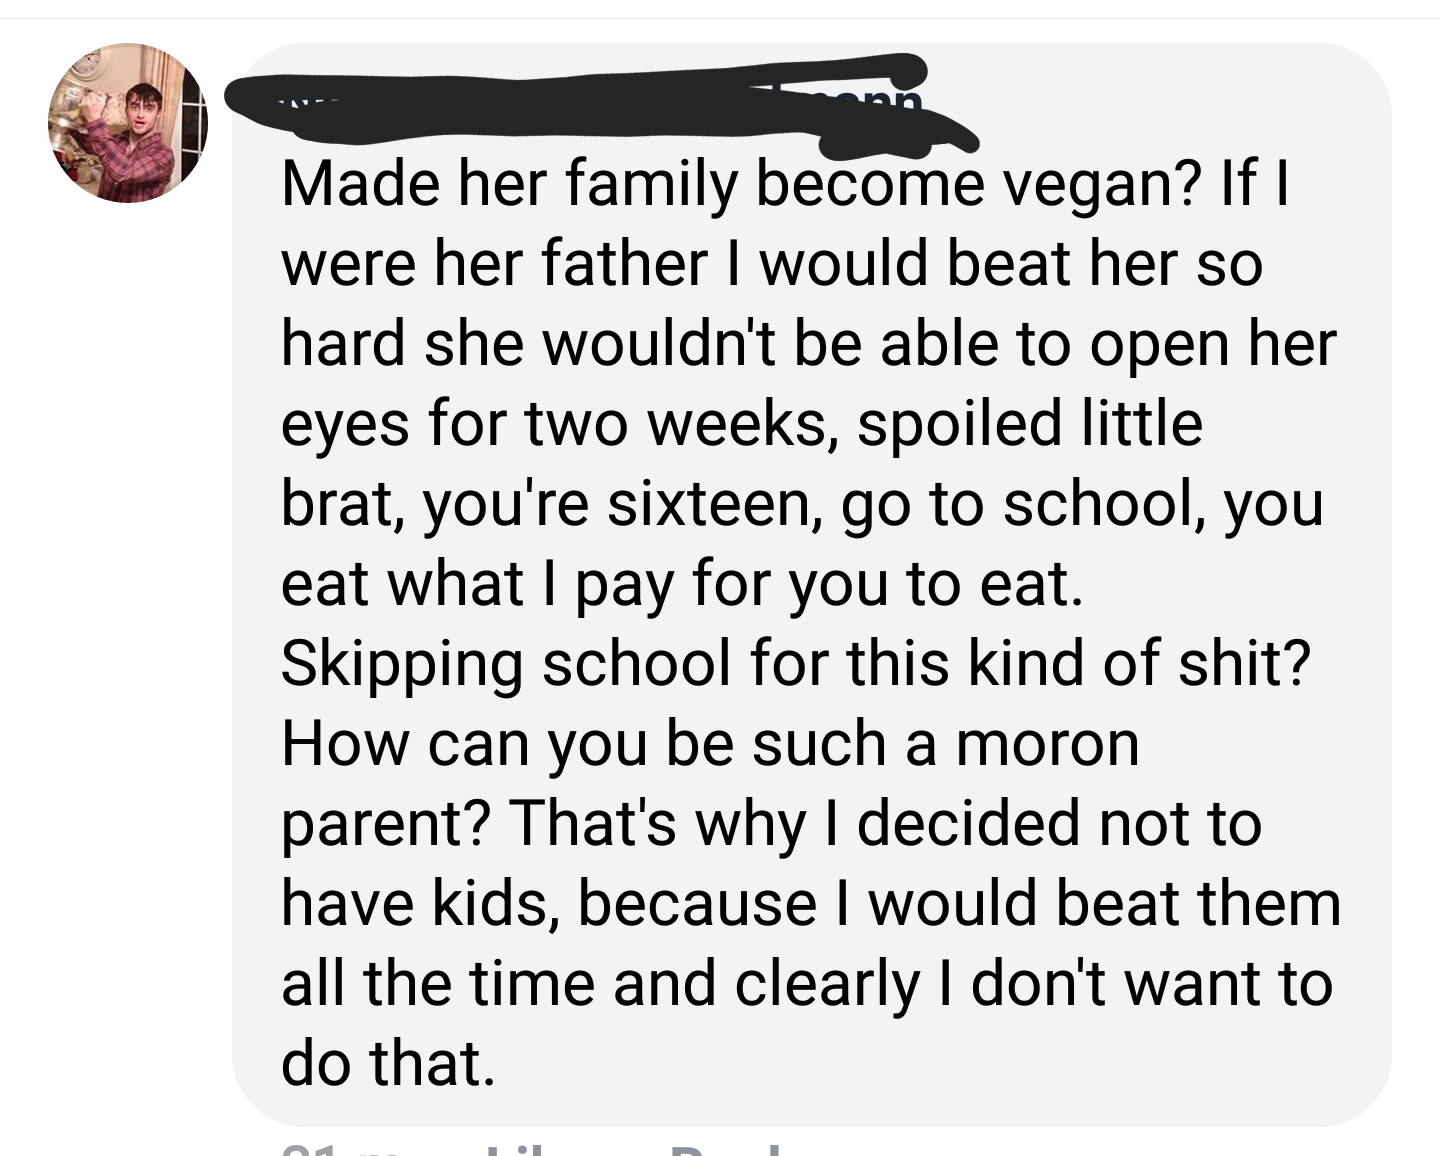 animal - Made her family become vegan? If || were her father I would beat her so hard she wouldn't be able to open her eyes for two weeks, spoiled little brat, you're sixteen, go to school, you eat what I pay for you to eat. Skipping school for this kind 